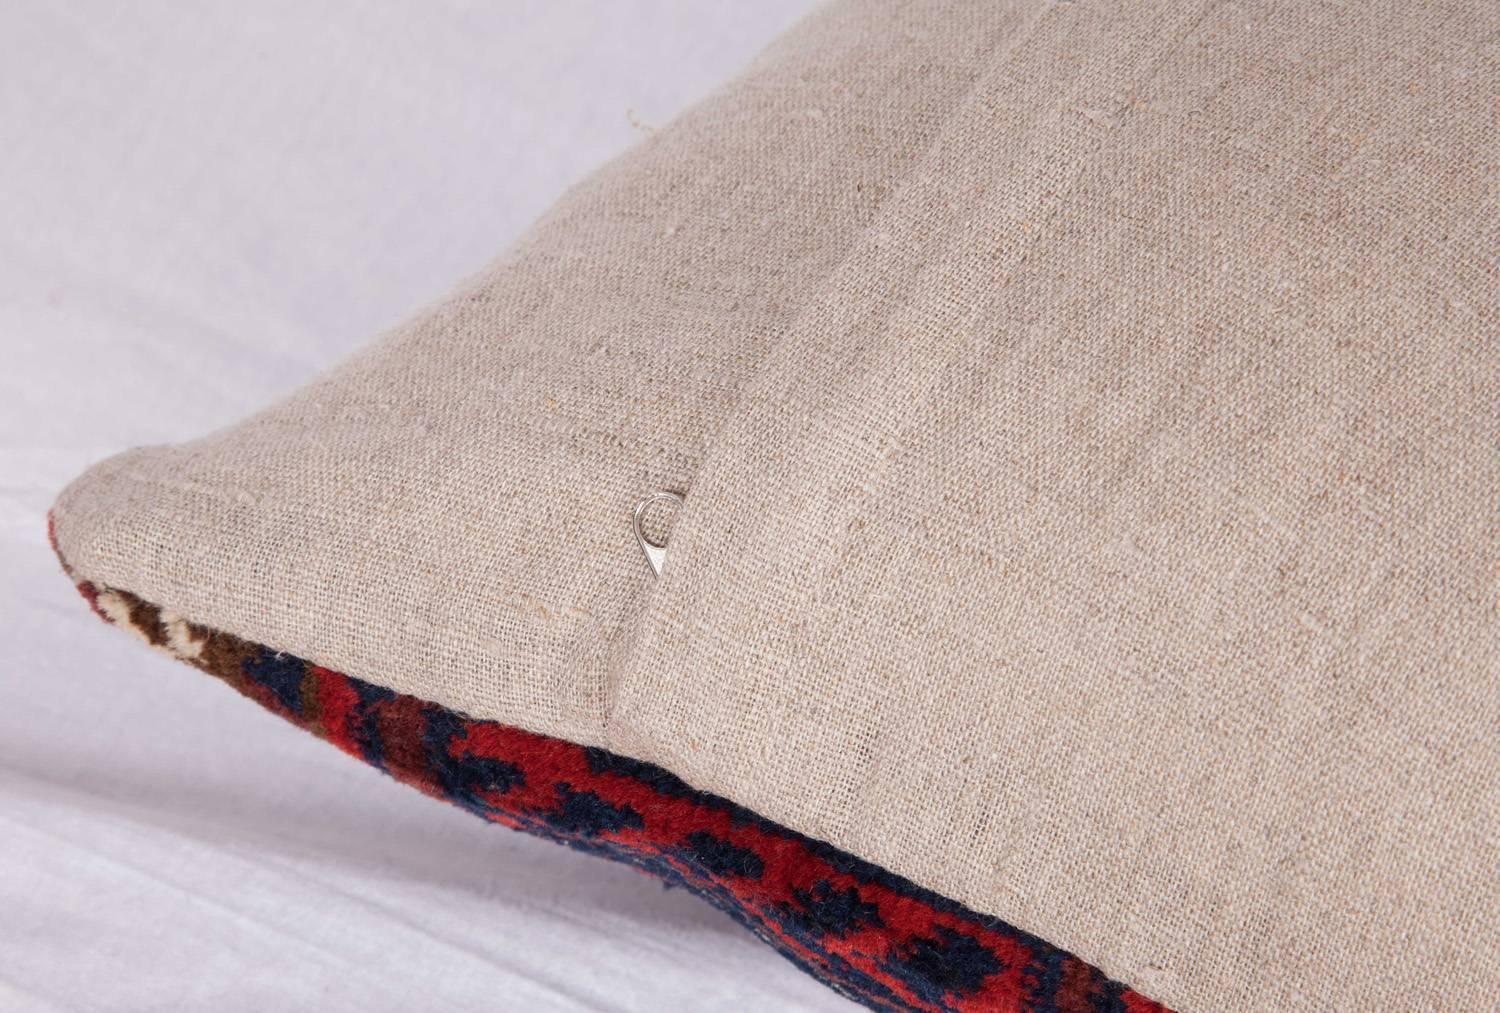 Woven Antique Pillow Made Out of a 19th Century Baluch Rug Fragment